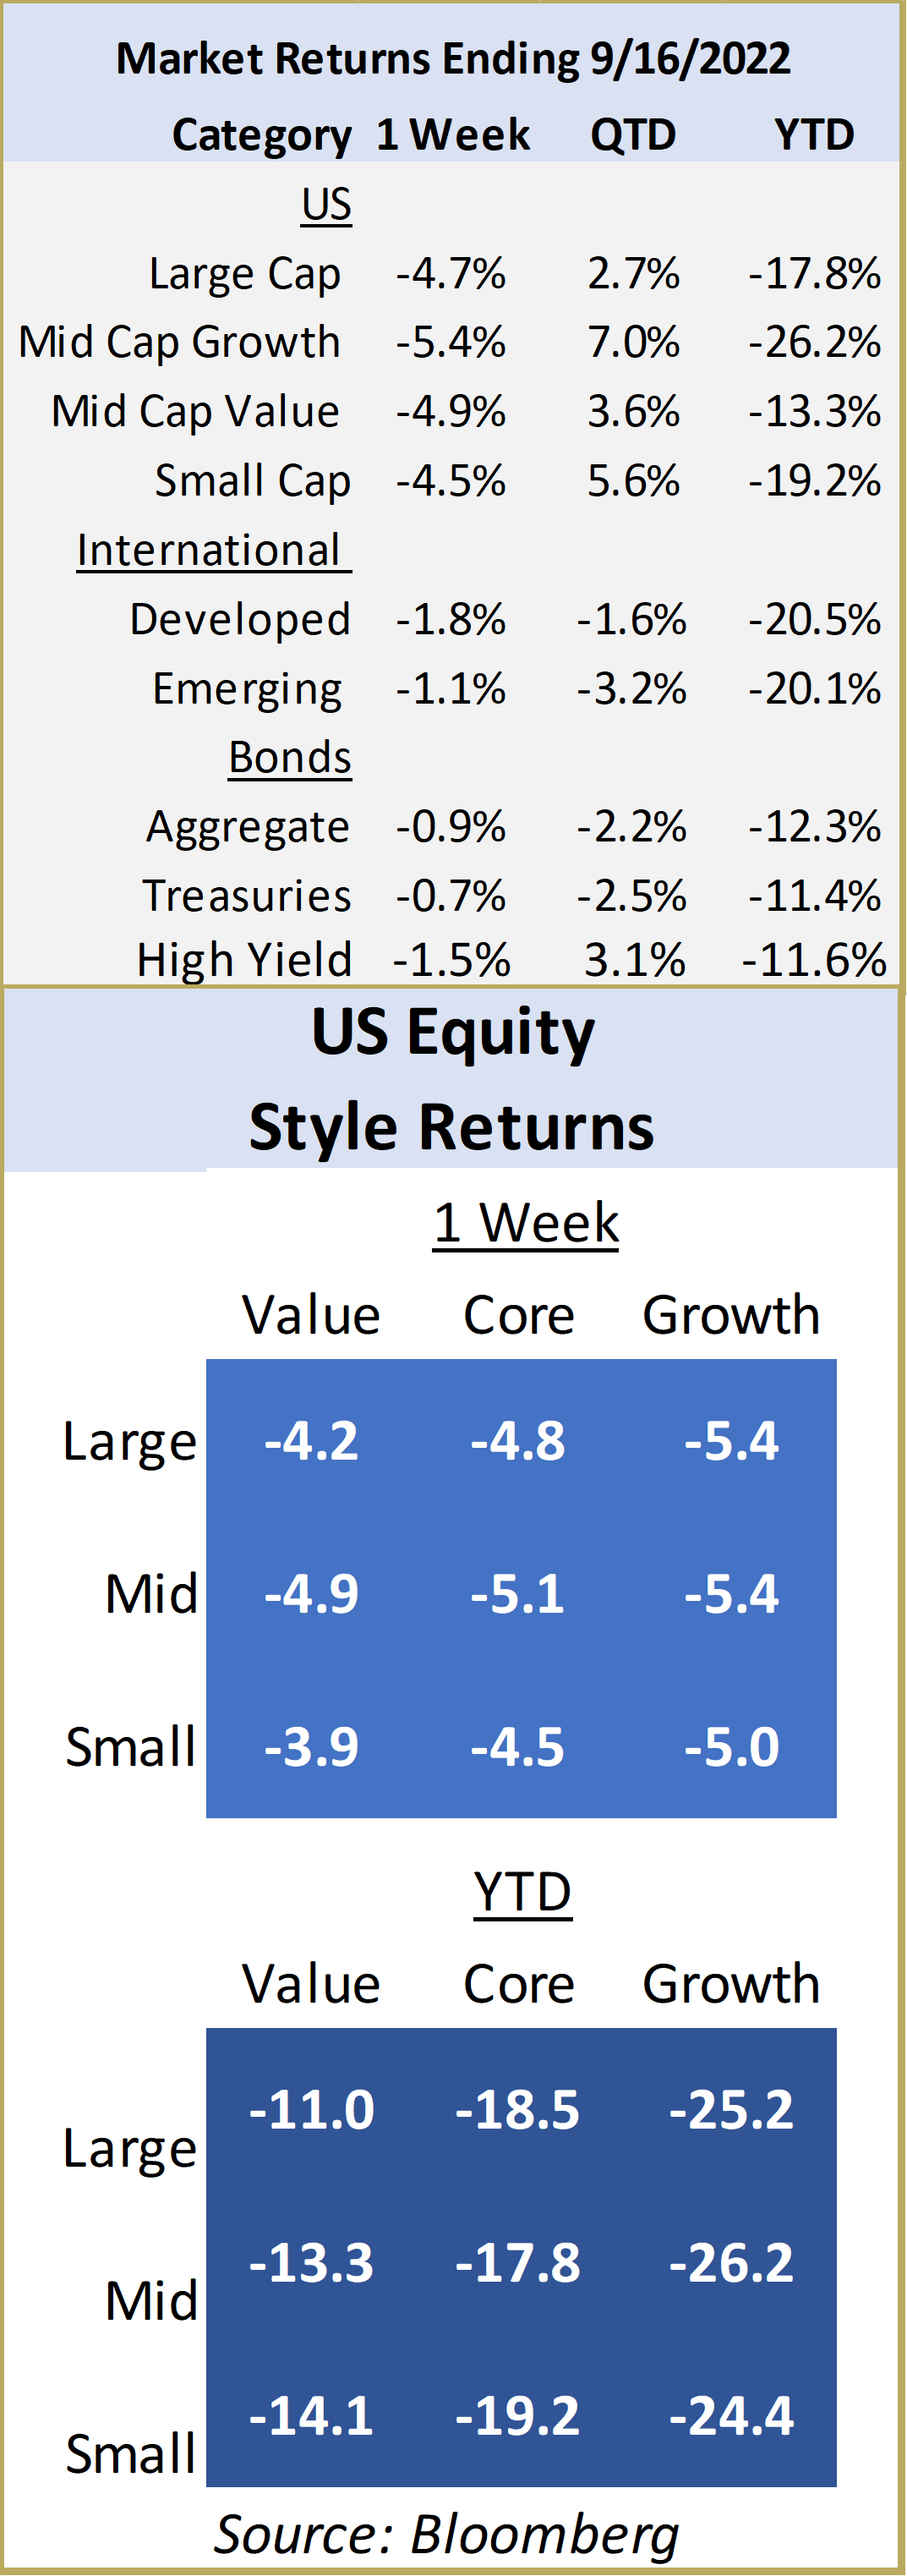 Market Returns Ending 9-16-2022 and US Equity Style Returns